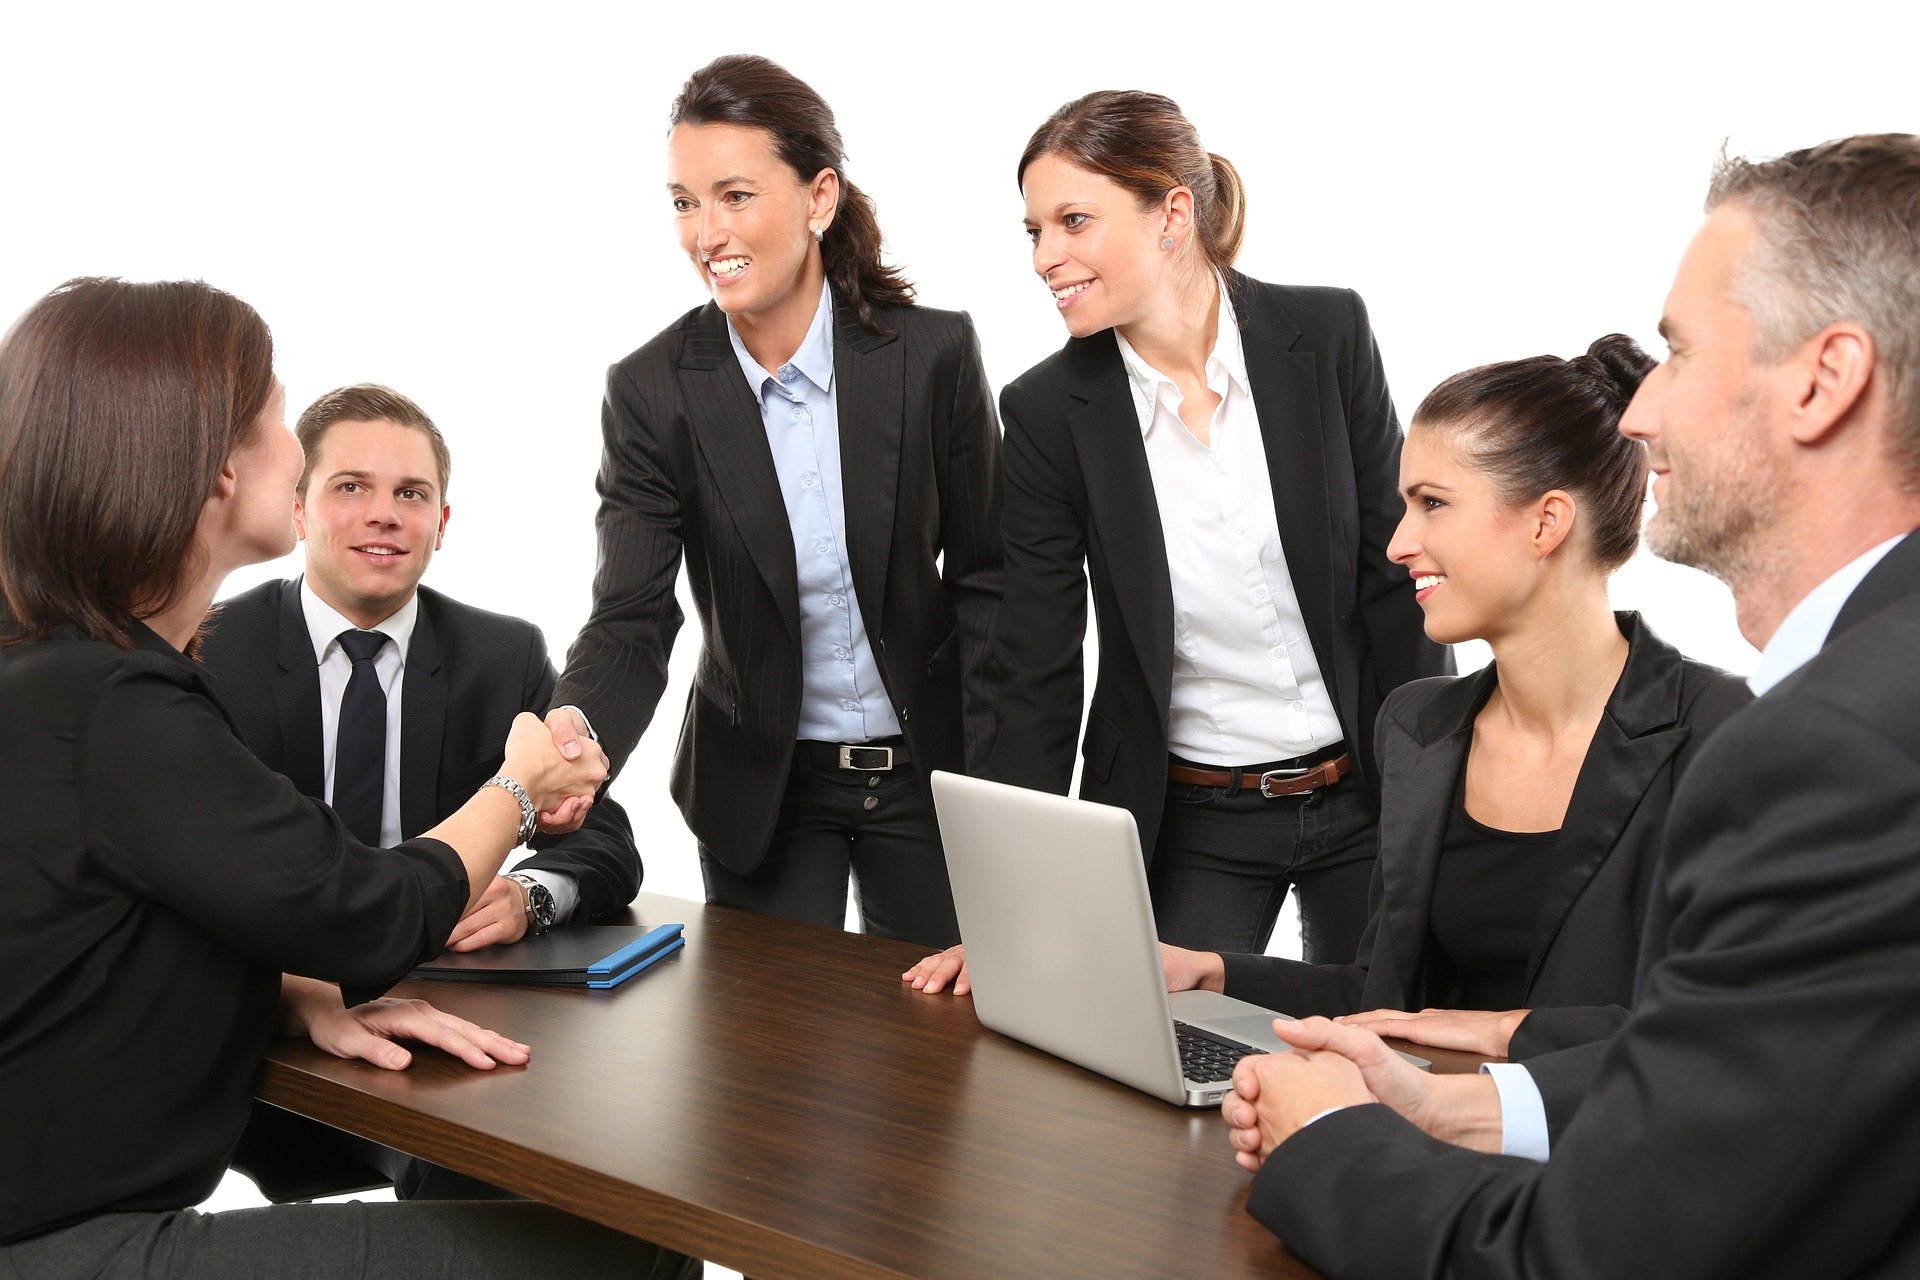 Pointers to hire talented team members as recommended by Saivian Eric Dalius